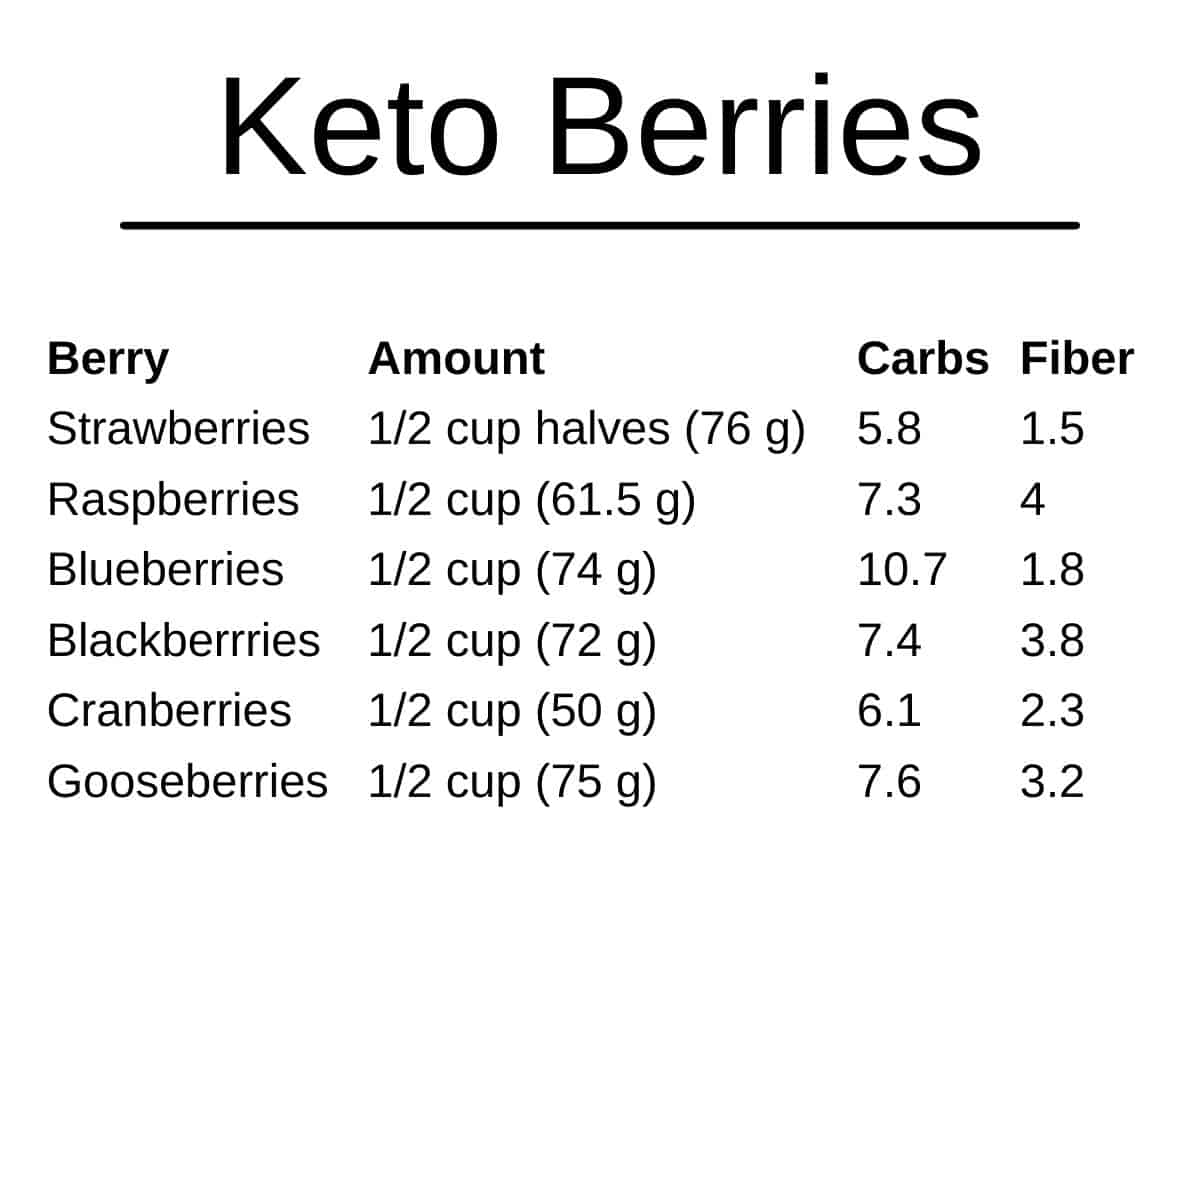 list of keto berries and carbs - The Ultimate Keto Guide to Keep Total Carbs Under 10 Grams